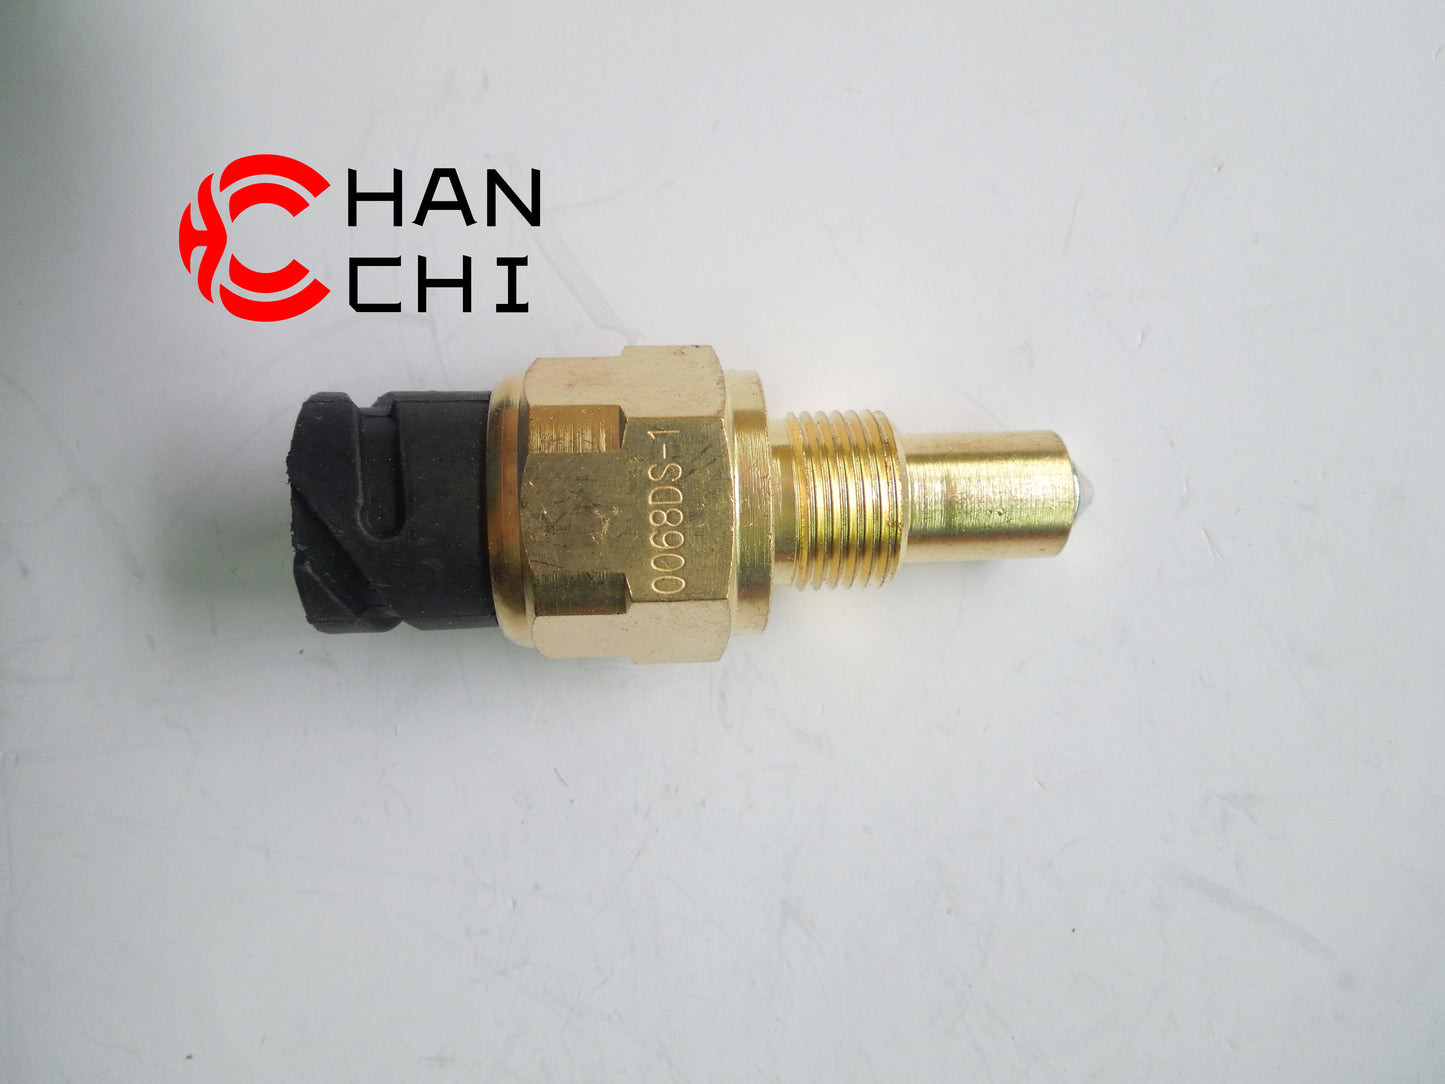 OEM: 0068DS-1Material: metalColor: black goldenOrigin: Made in ChinaWeight: 50gPacking List: 1* Reversing Light Switch More Service We can provide OEM Manufacturing service We can Be your one-step solution for Auto Parts We can provide technical scheme for you Feel Free to Contact Us, We will get back to you as soon as possible.